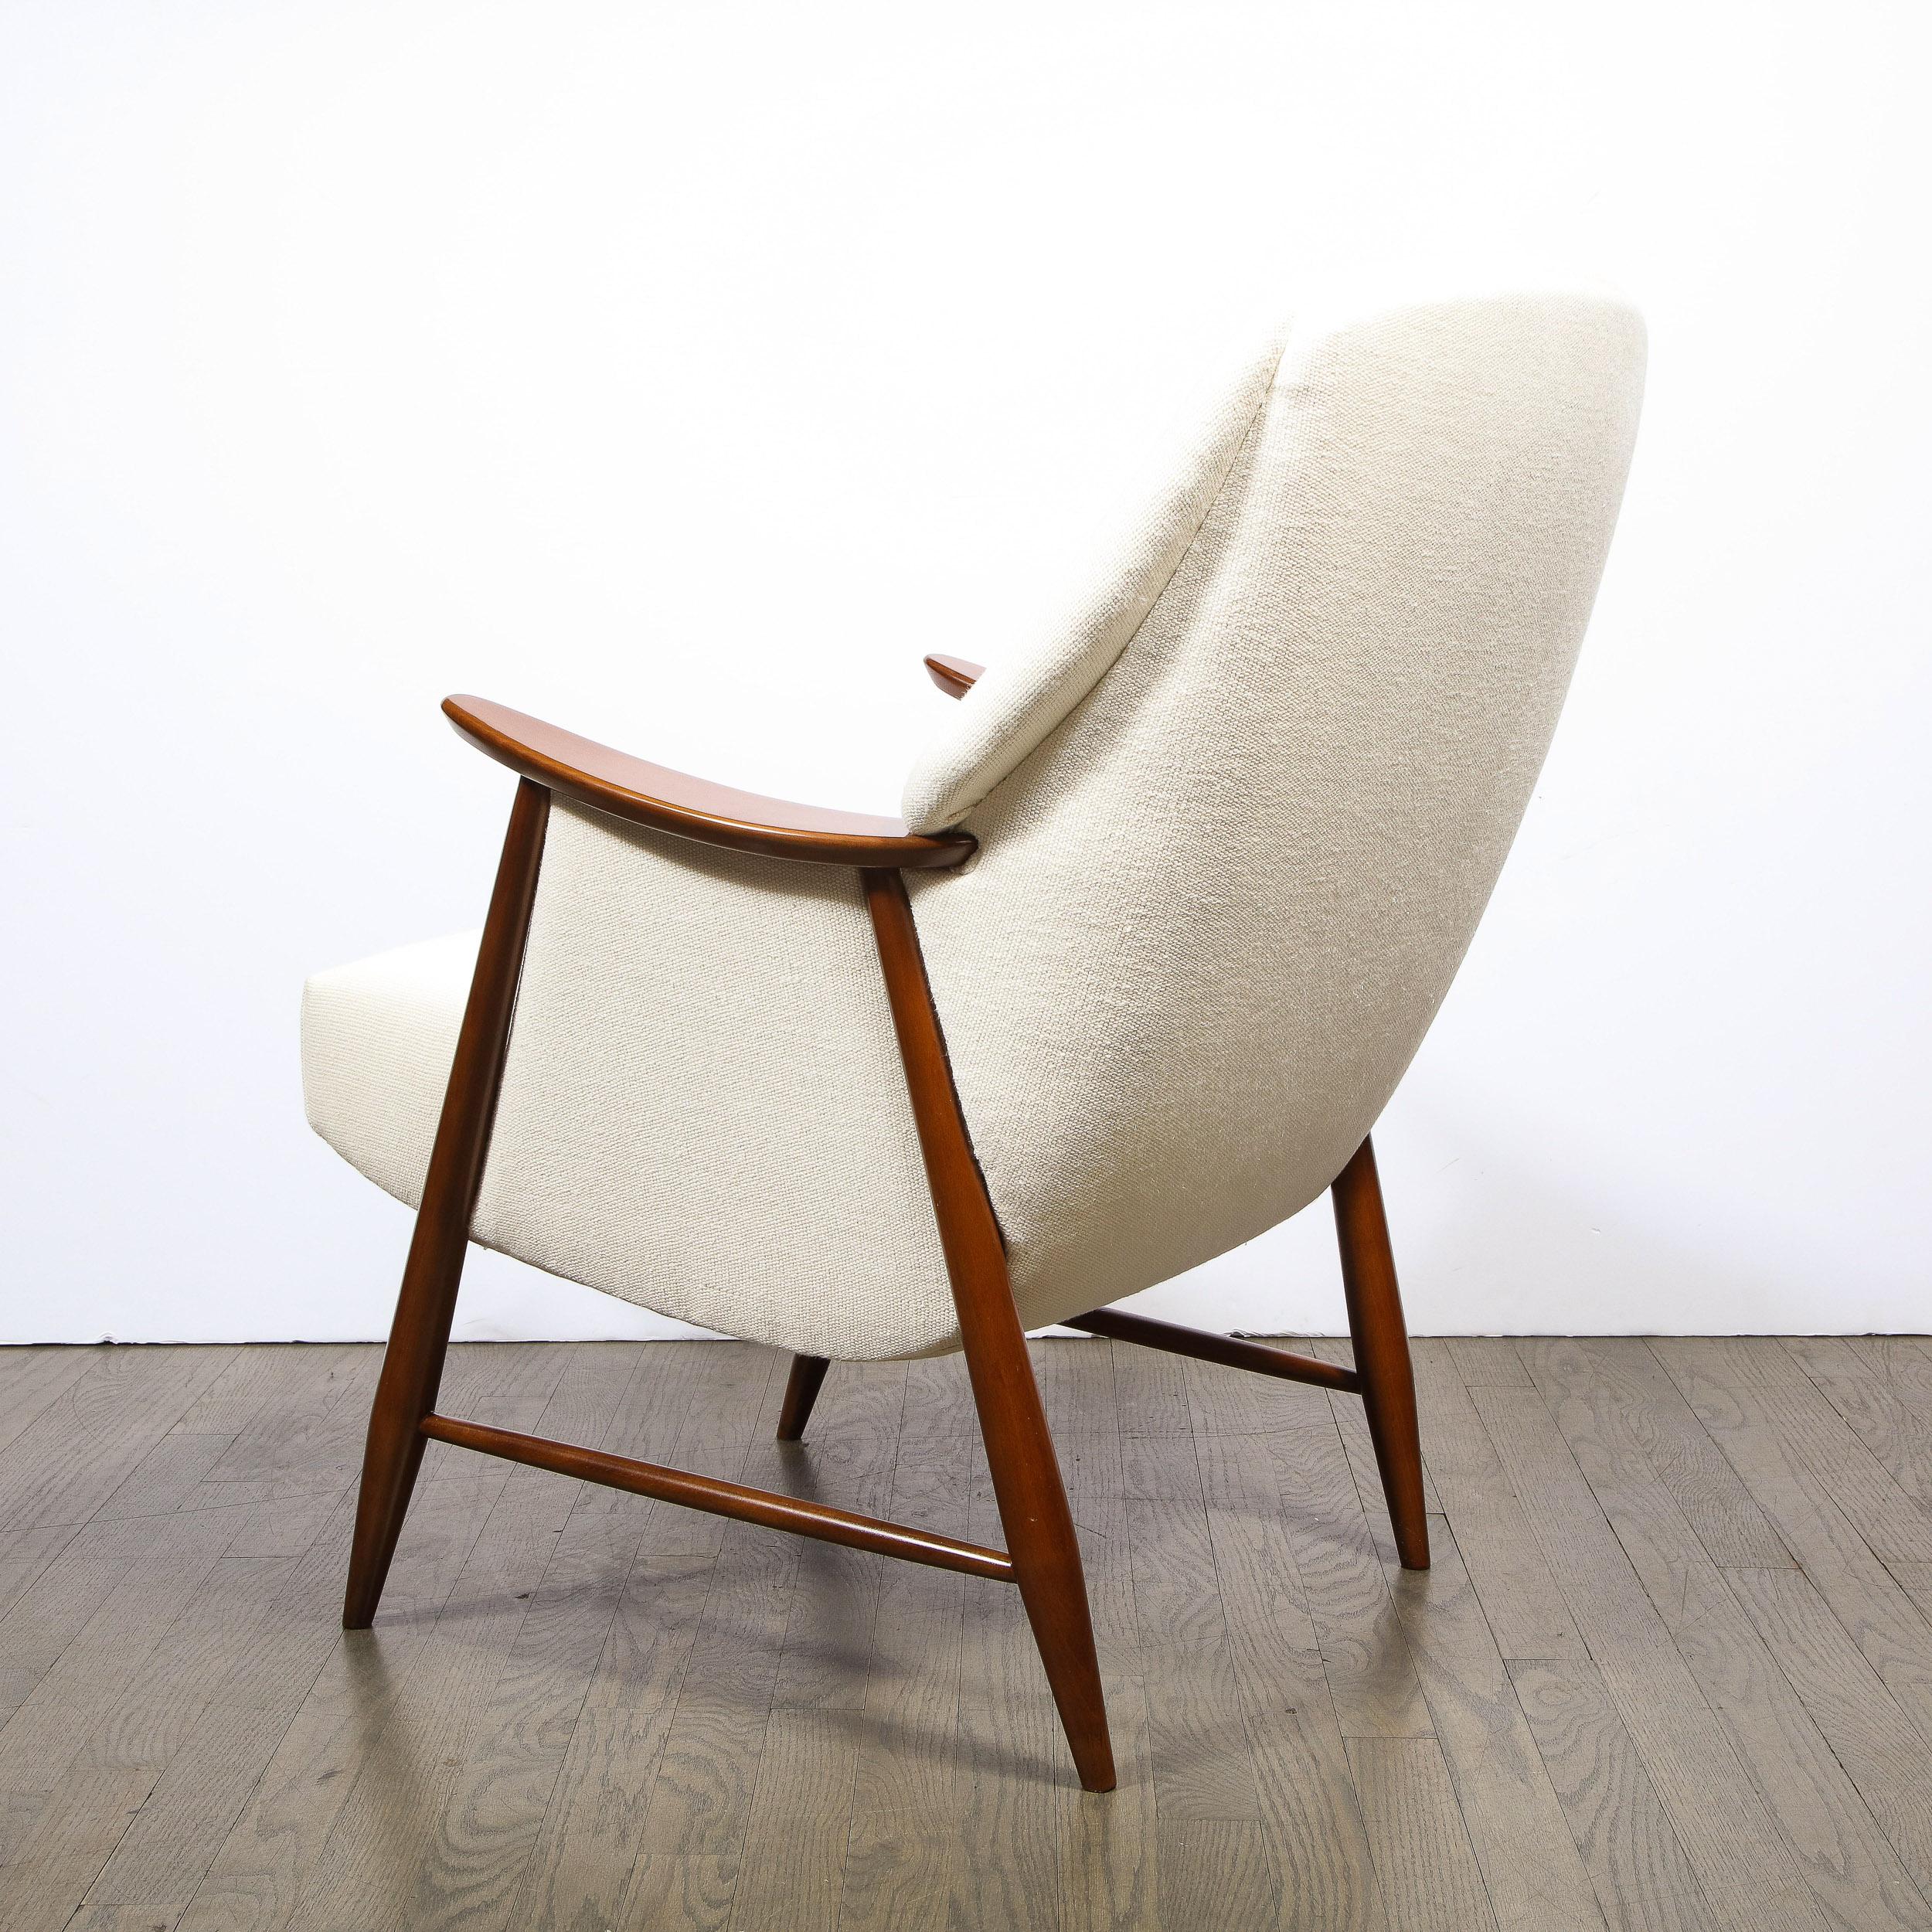 Mid-20th Century Pair of Mid-Century Modern Button Back Saddle-Armed Chairs in Handrubbed Walnut